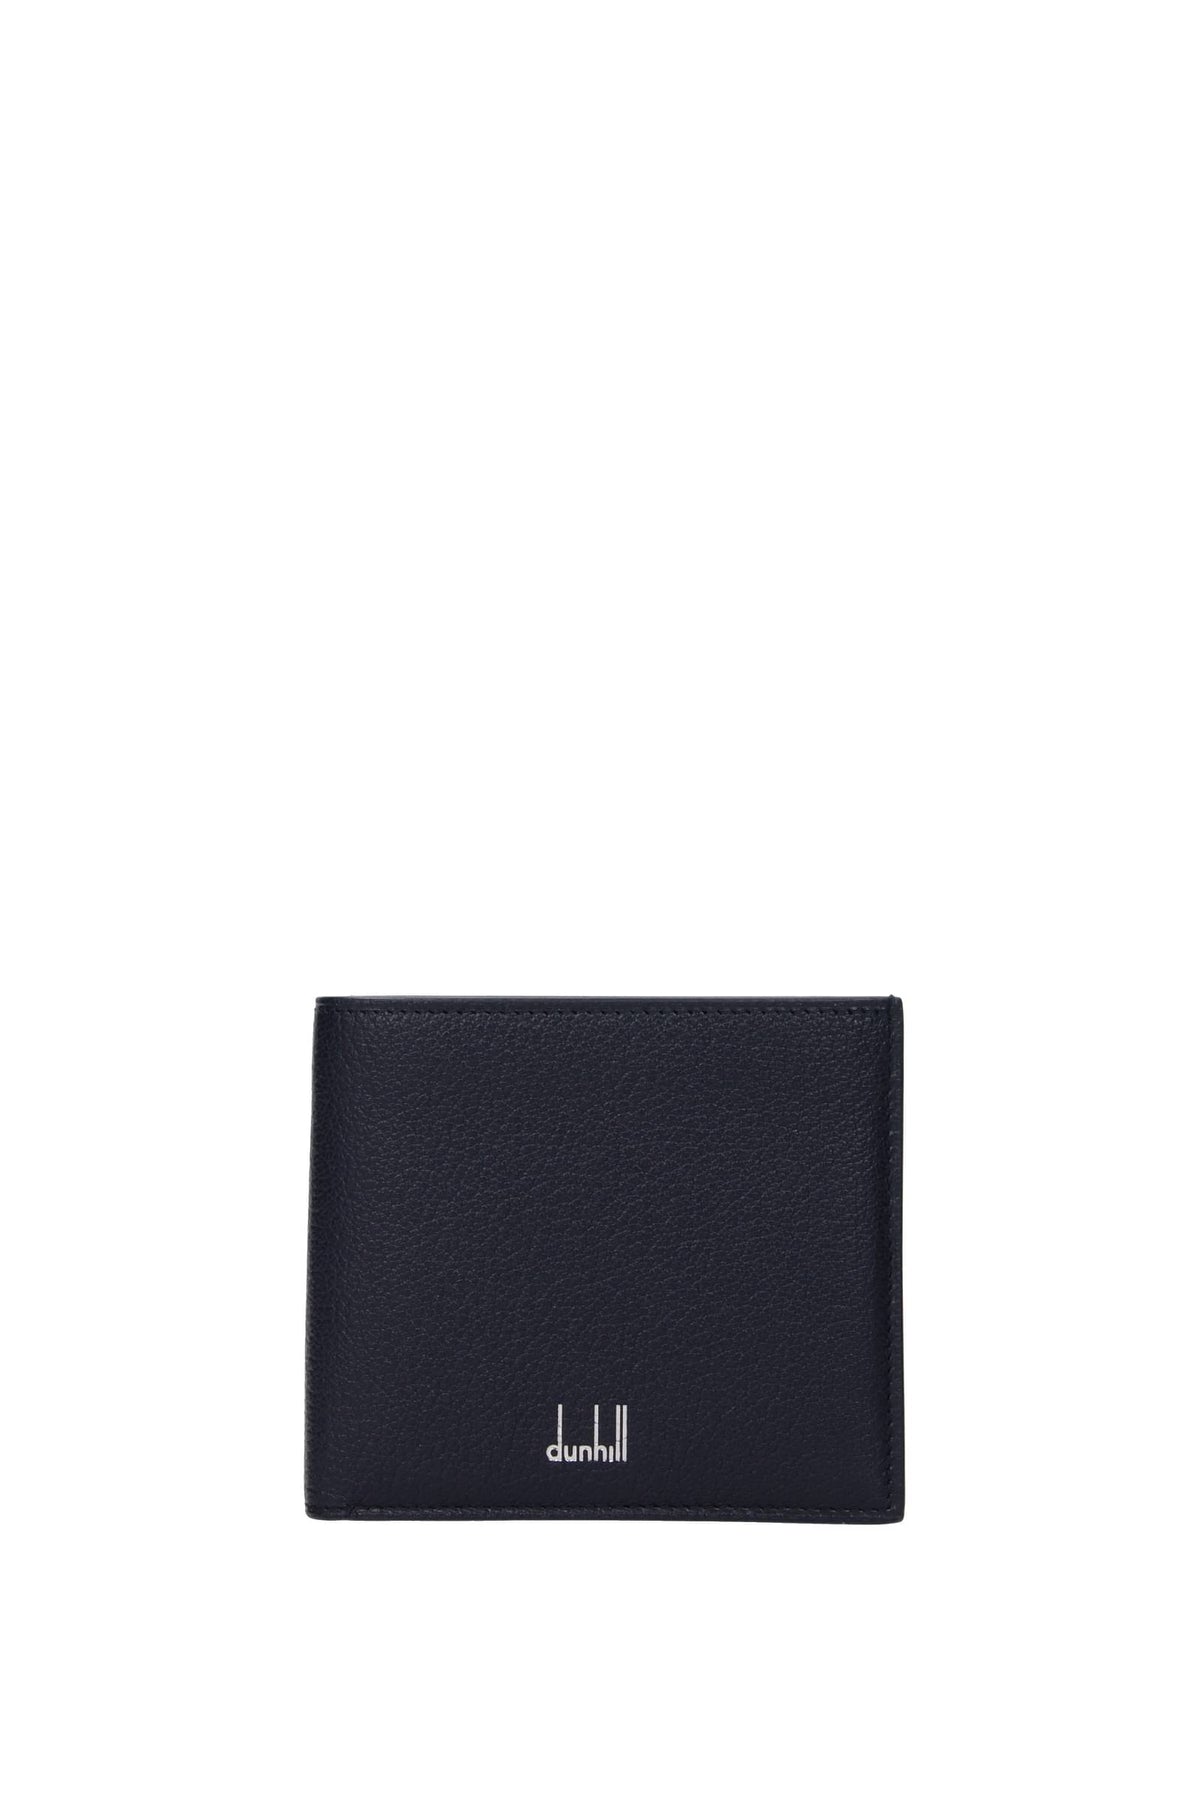 DUNHILL WALLETS LEATHER BLUE